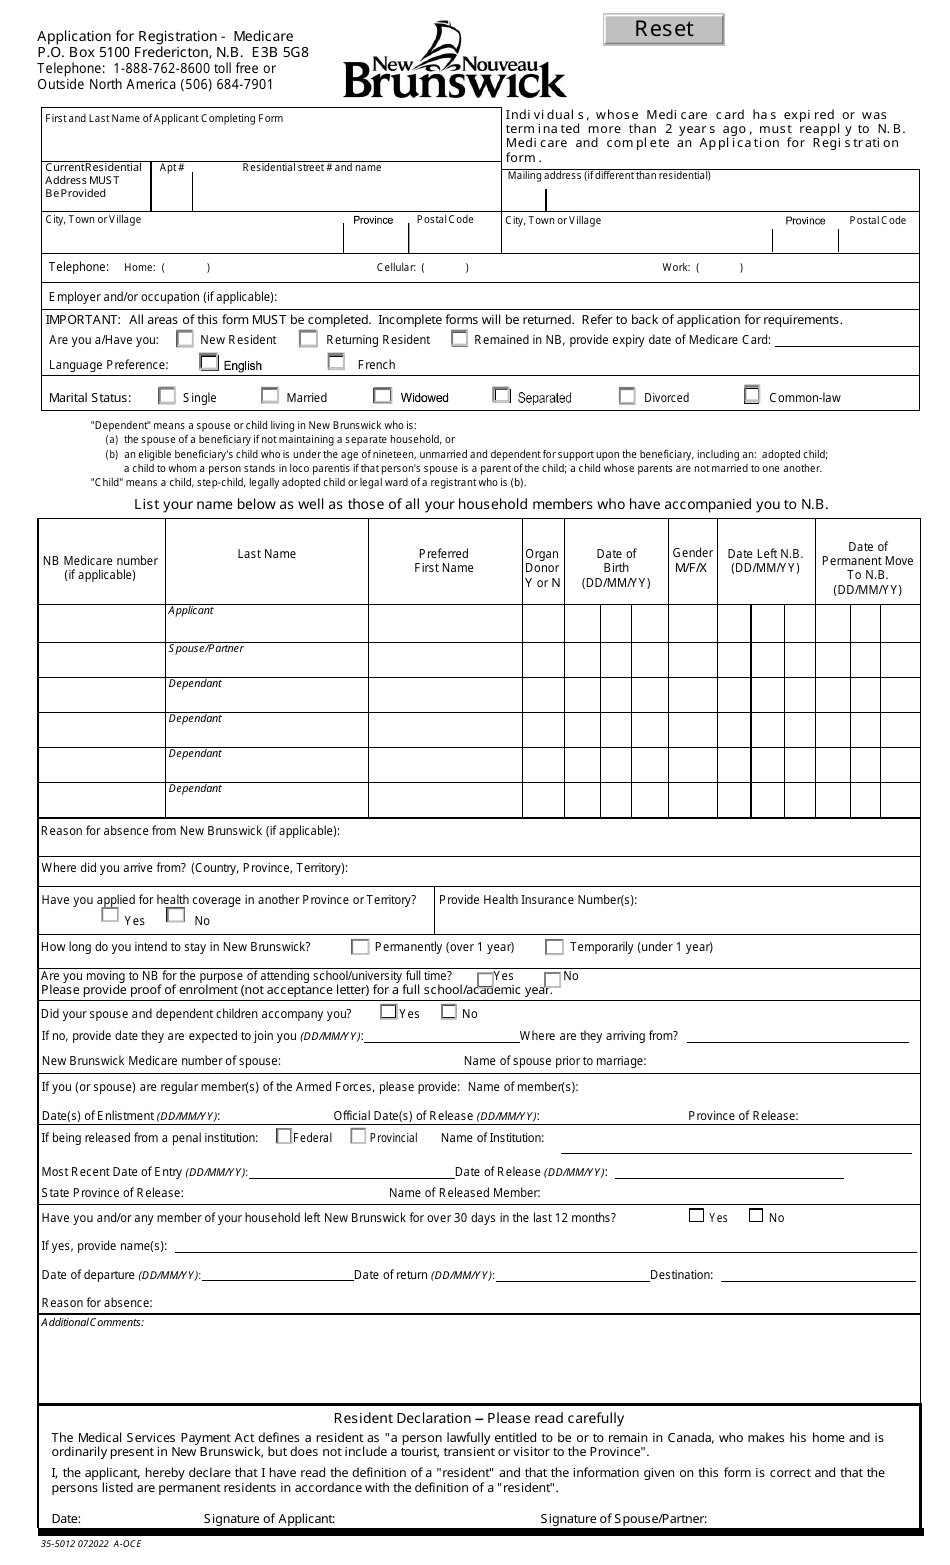 Form 35-5012 Application for Registration - Medicare - New Brunswick, Canada, Page 1